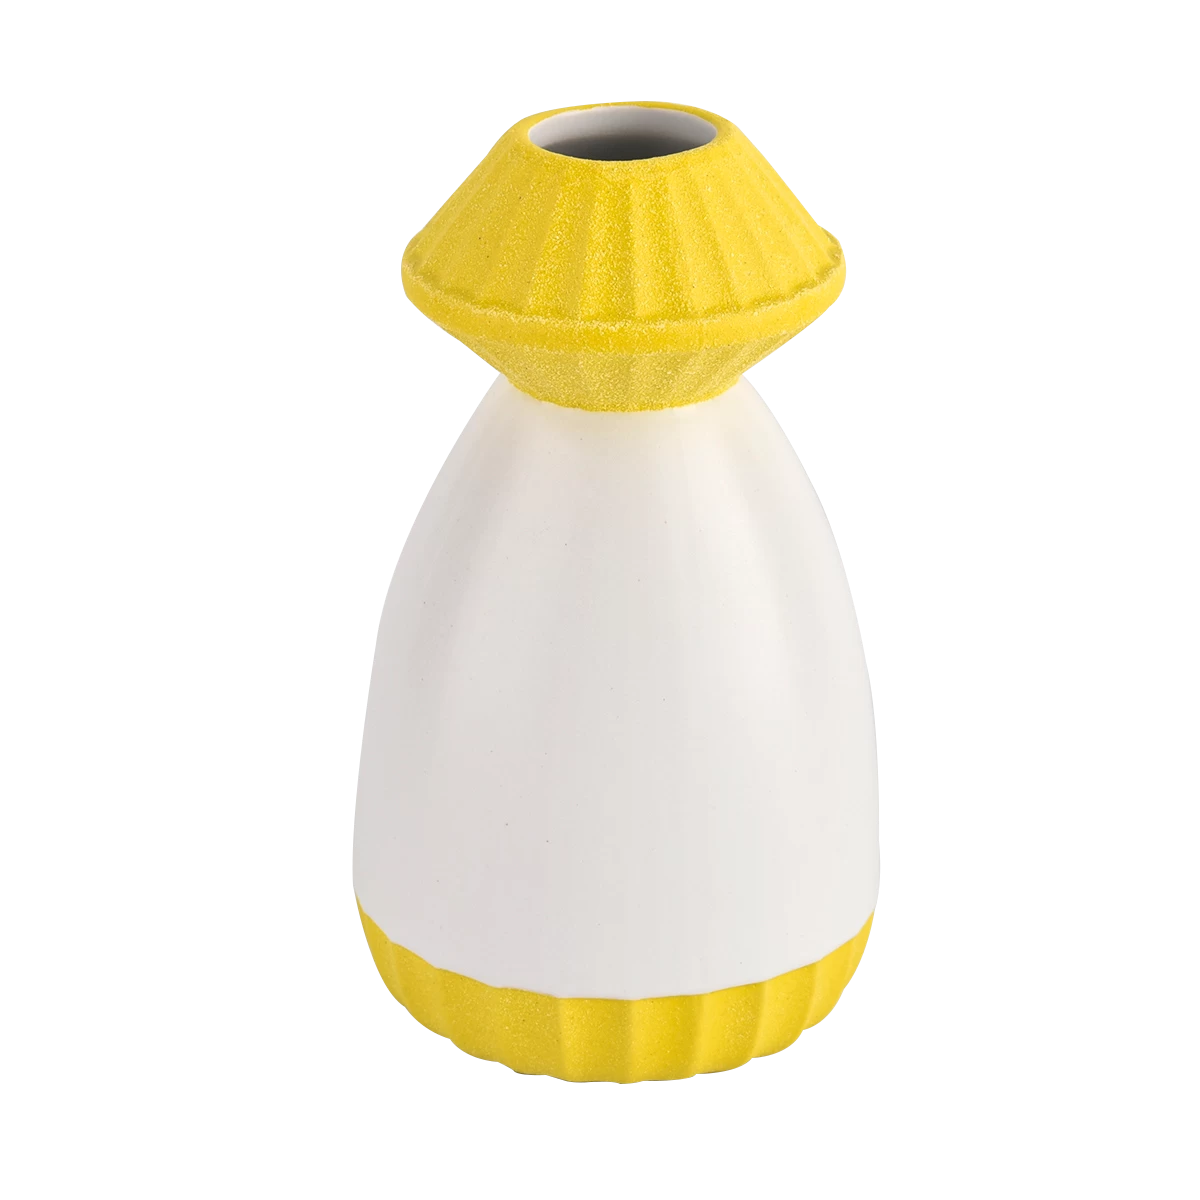 Wholesale suppliers of modern design ceramic reed diffuser bottles